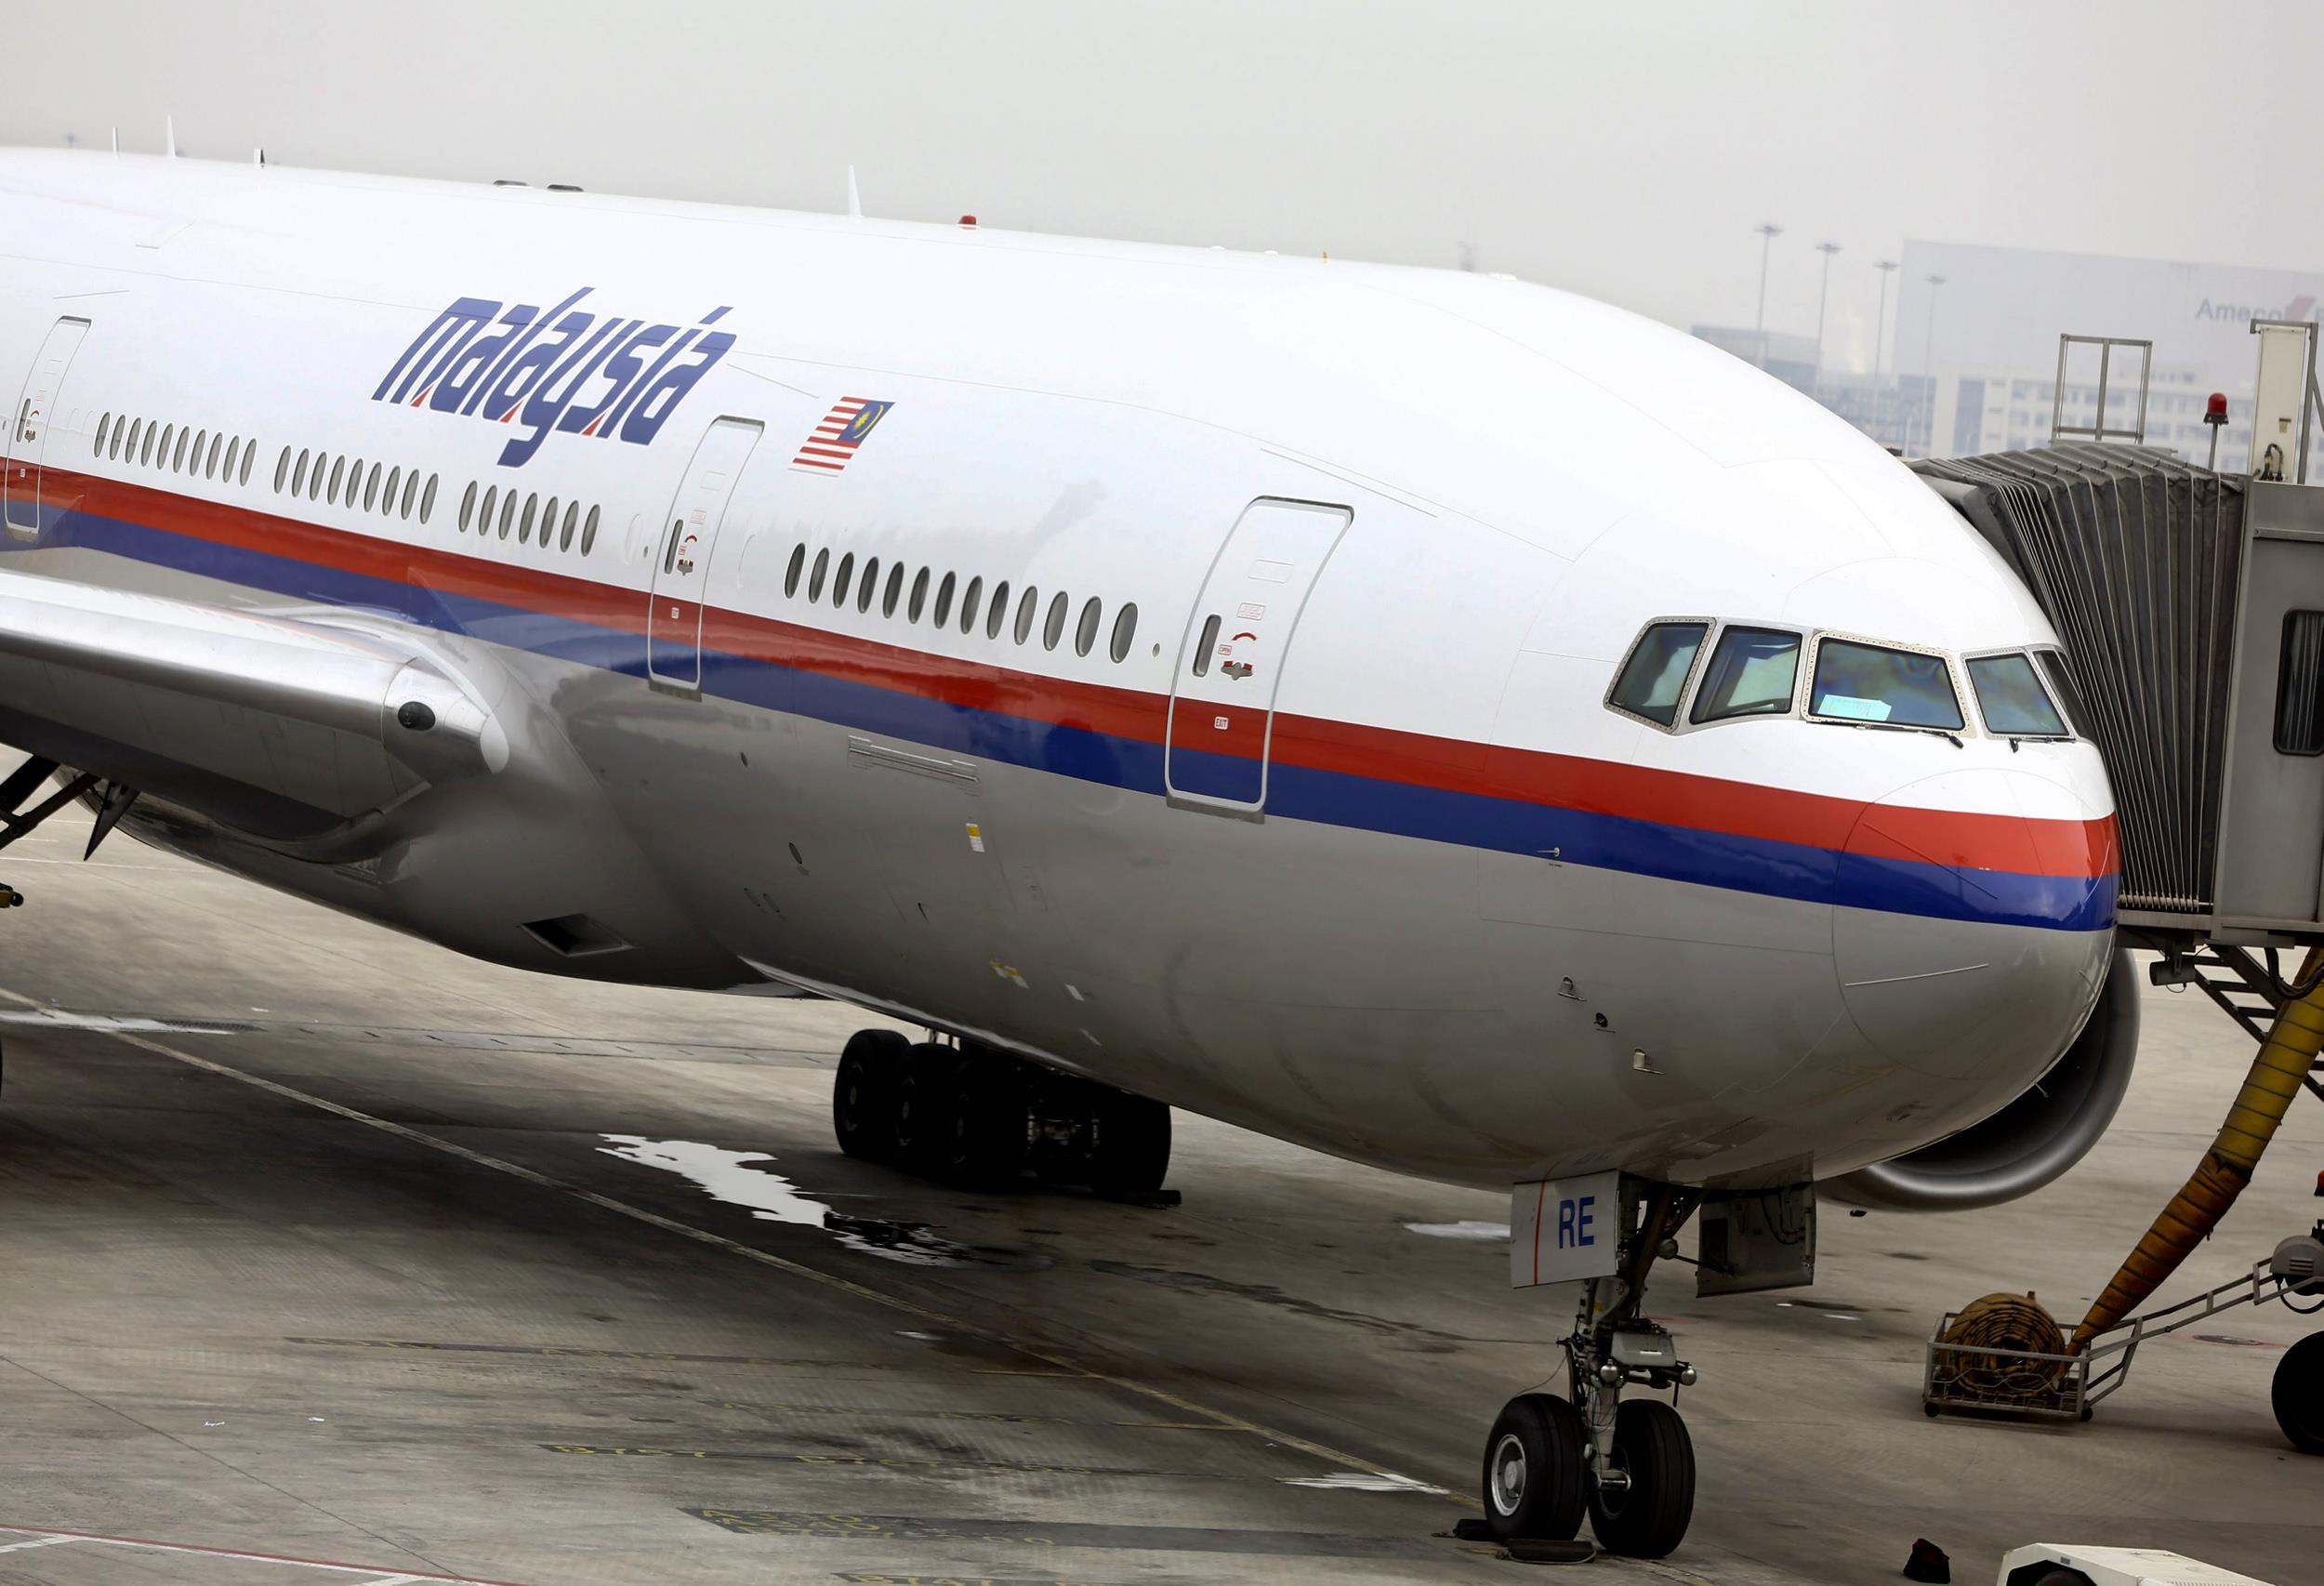 Malaysia Airlines is waiving all change fees